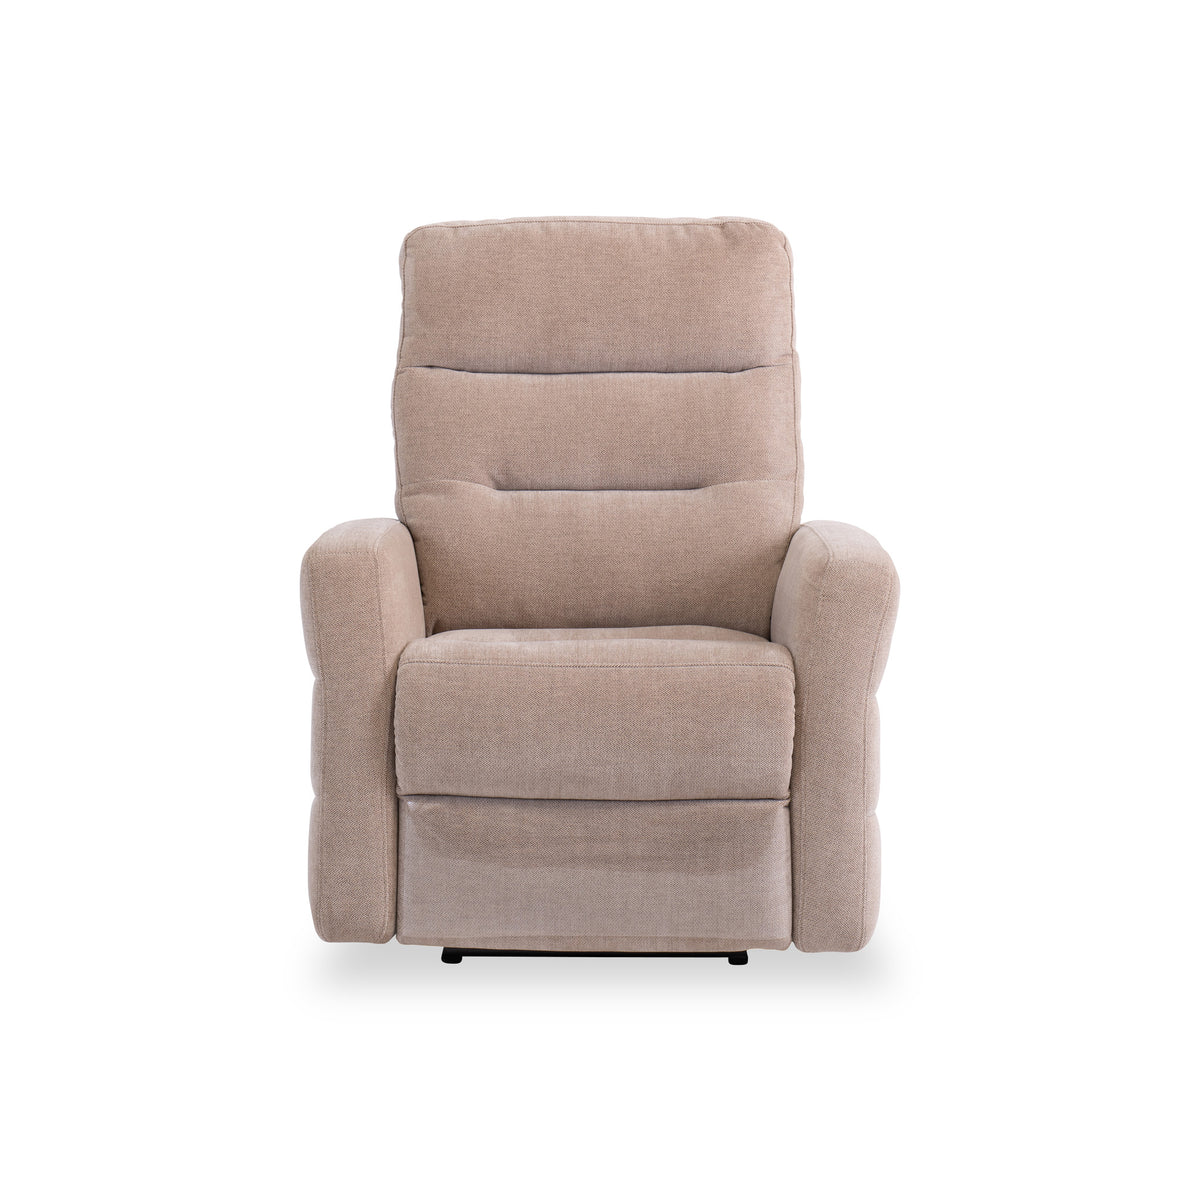 Dalton Mink Fabric Electric Reclining Armchair from Roseland Furniture